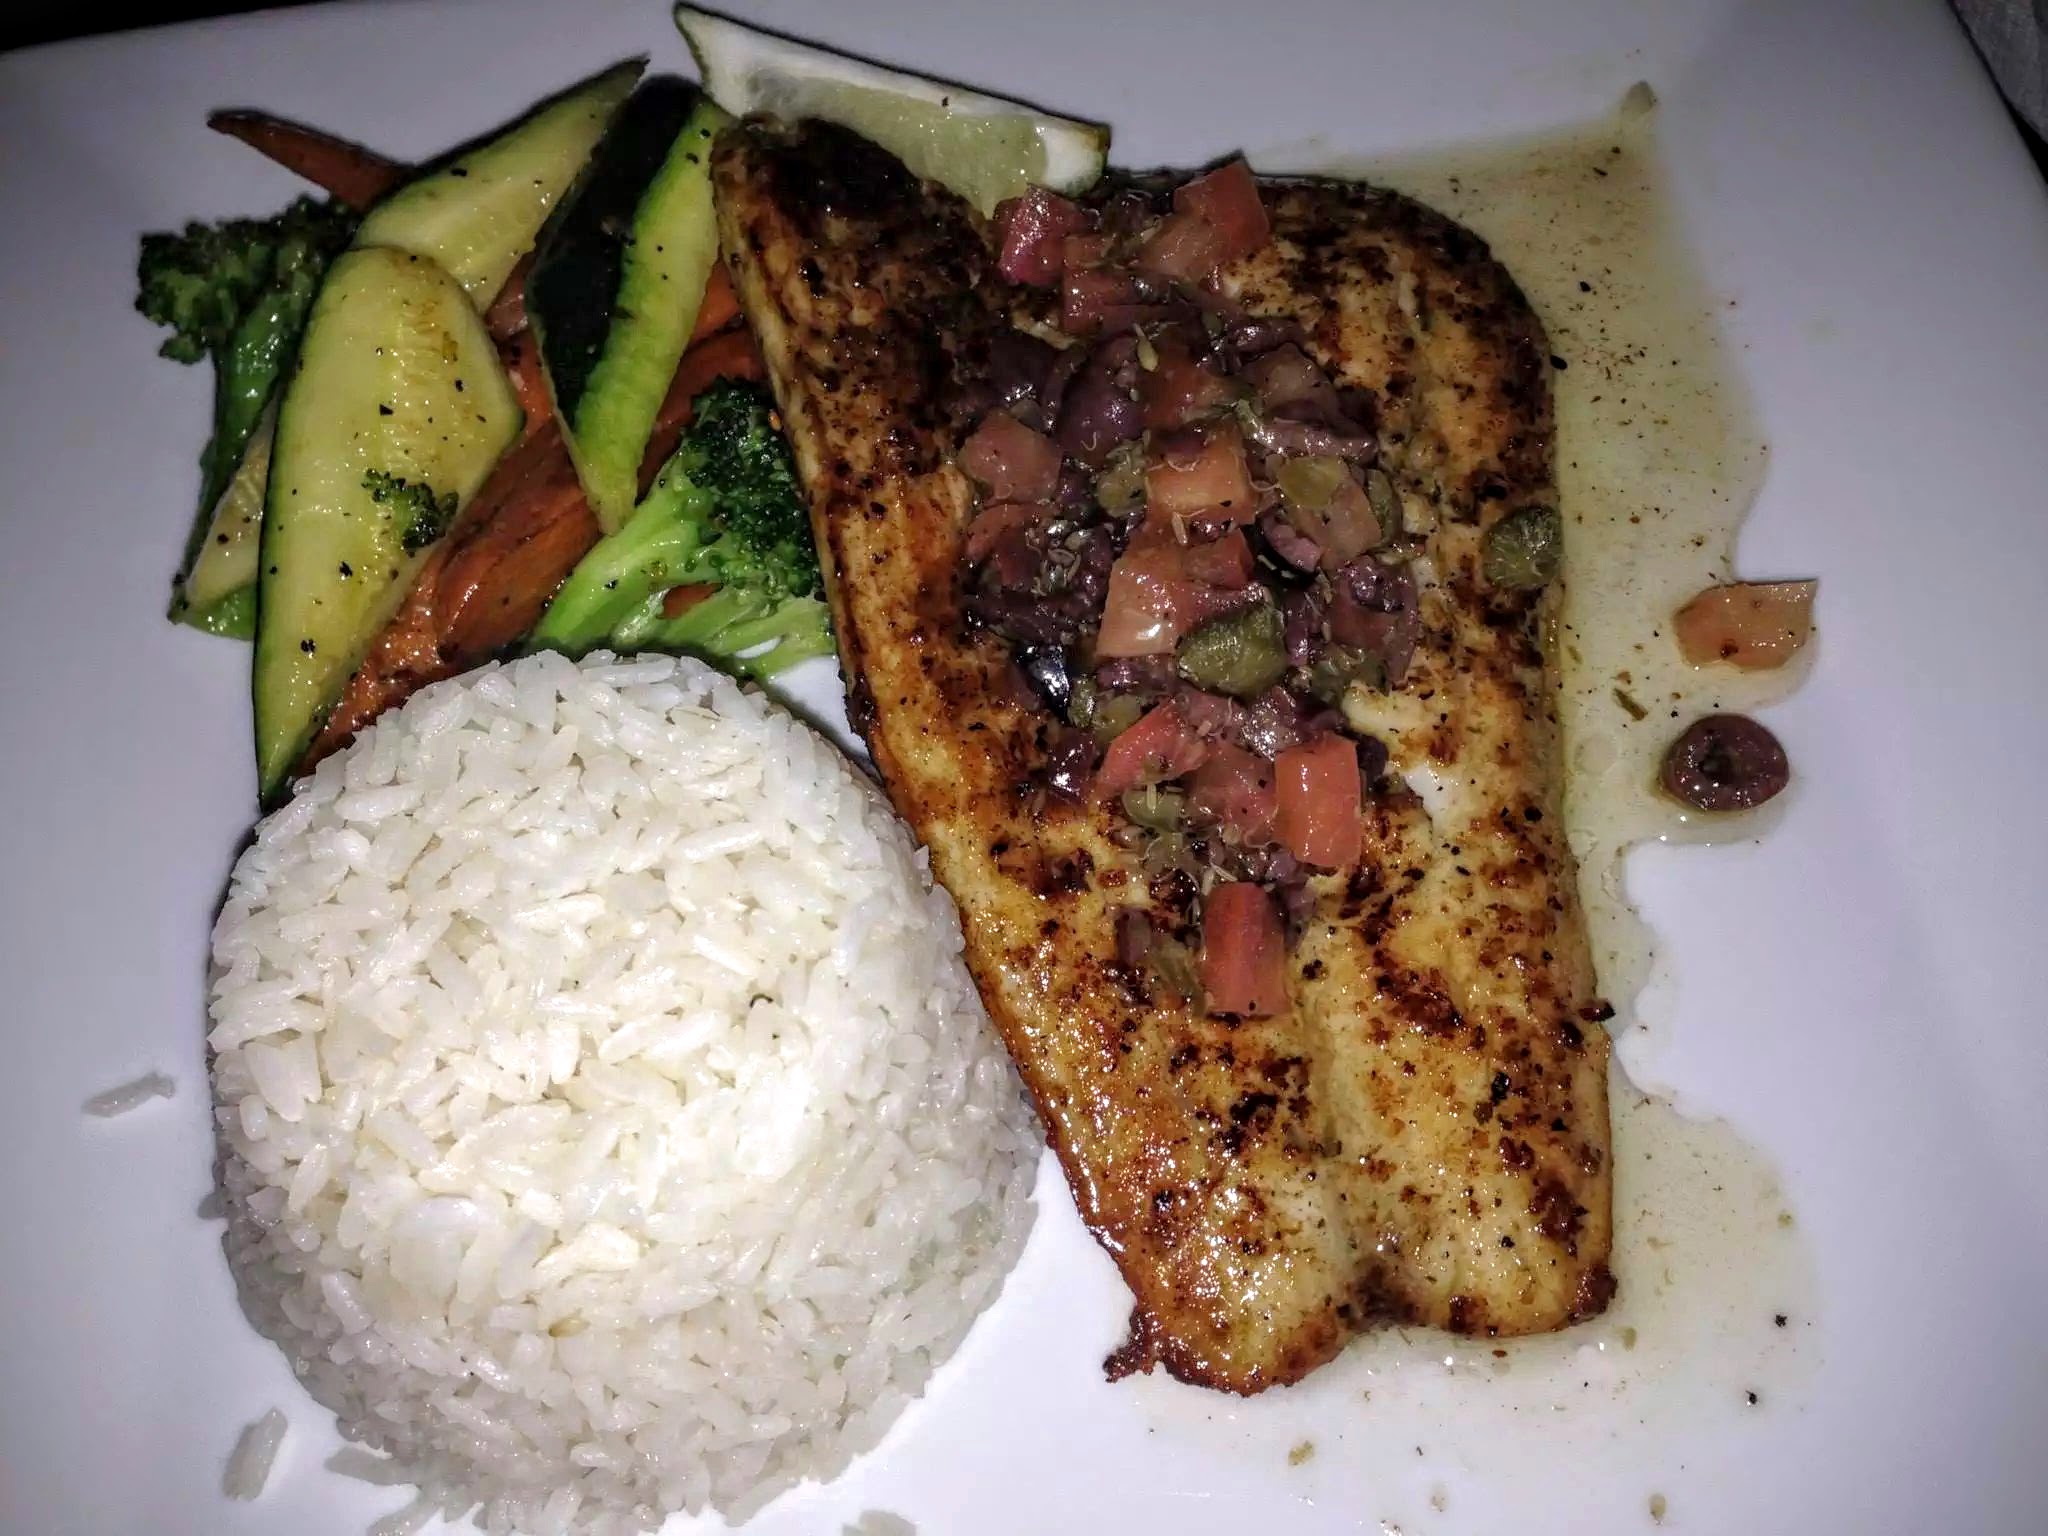 The Daily Catch - Pan Seared Fish, Basmati Rice with Sauteed Seasonal Vegetables